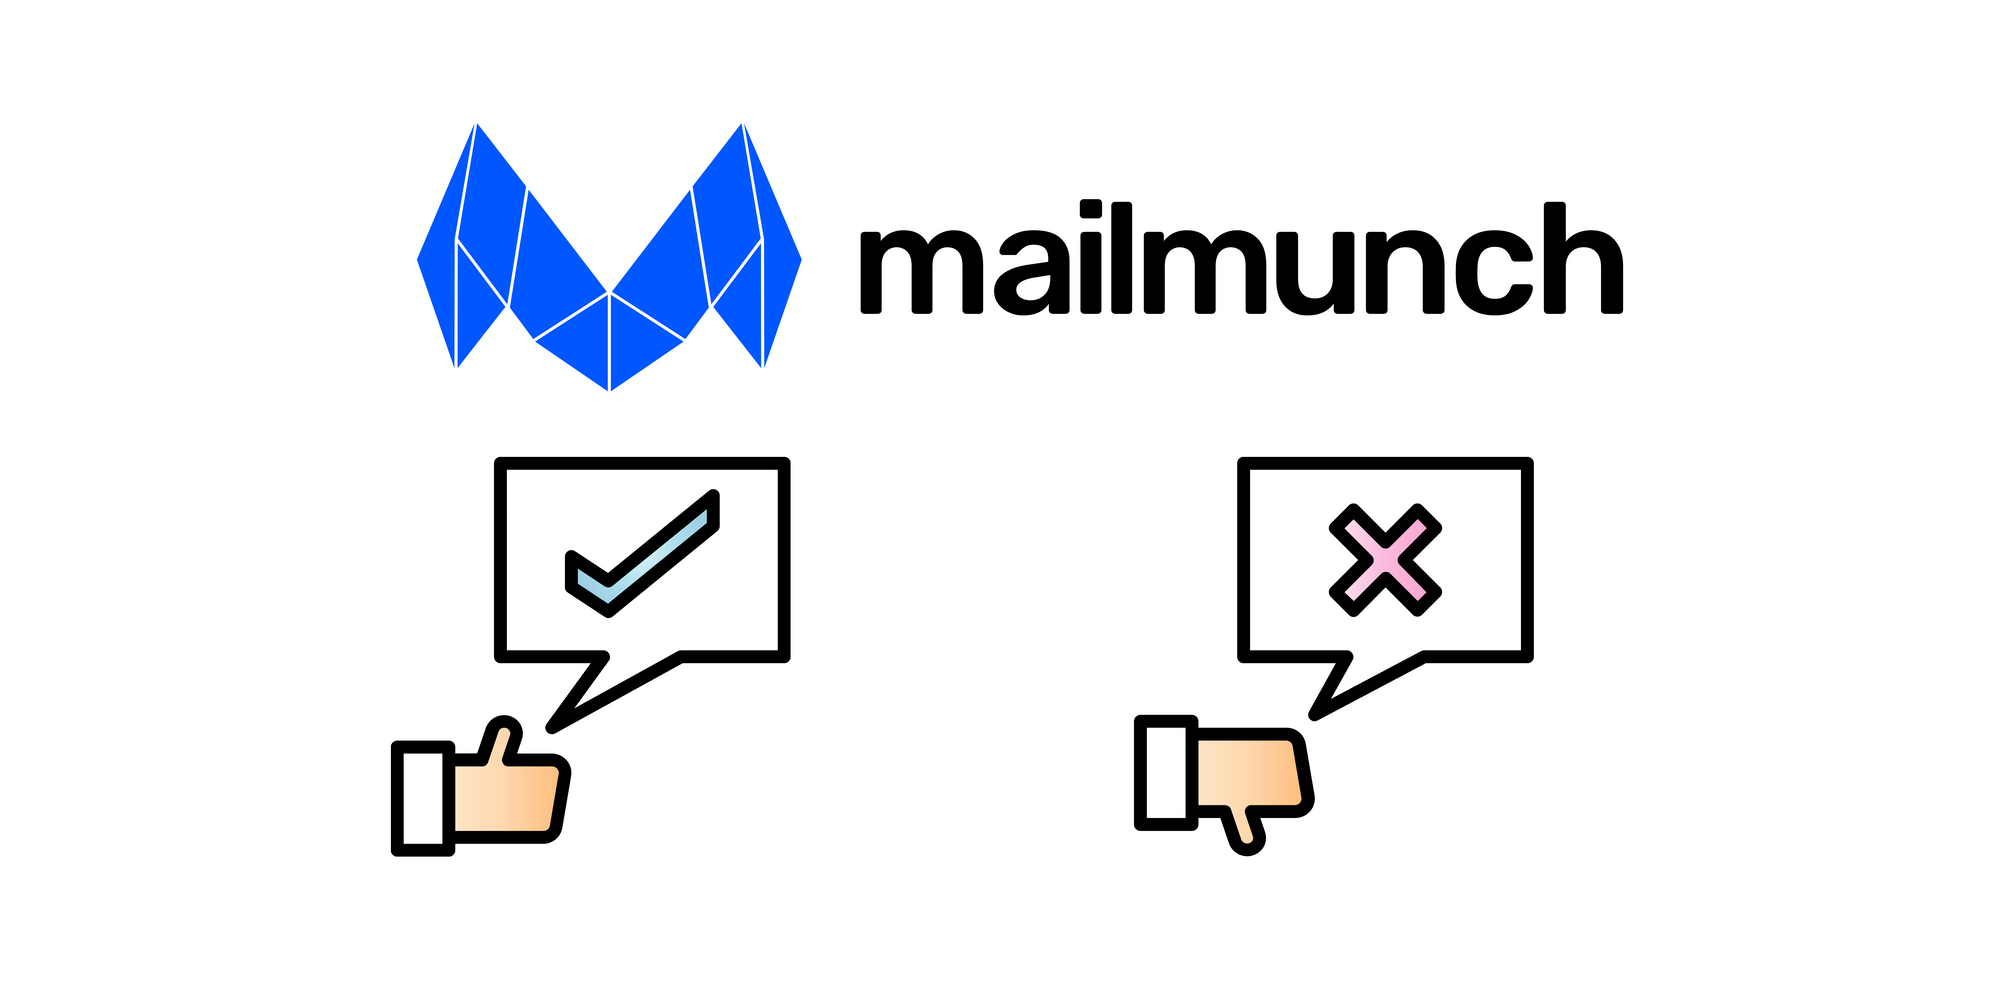 Mailmunch icon, check and x icons with thumbs-up & thumbs-down on white background to talk about the pros and cons